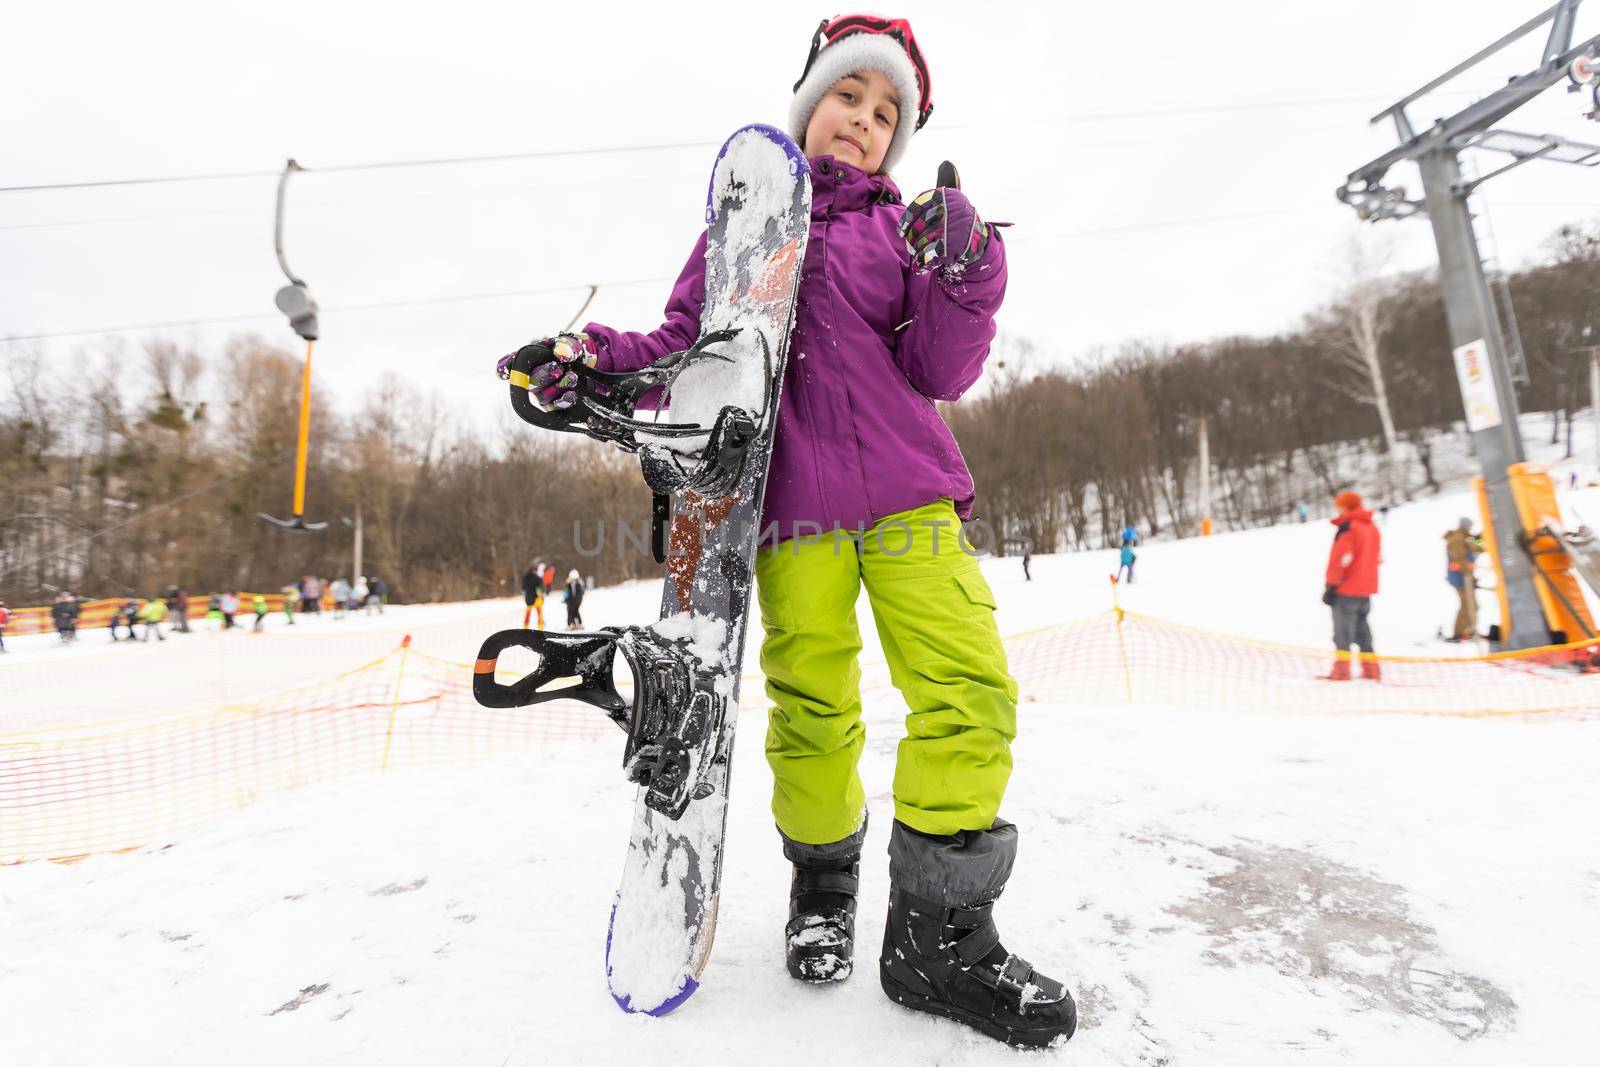 little cute girl learning to ride a children's snowboard, winter sports for the child, safety of active sports